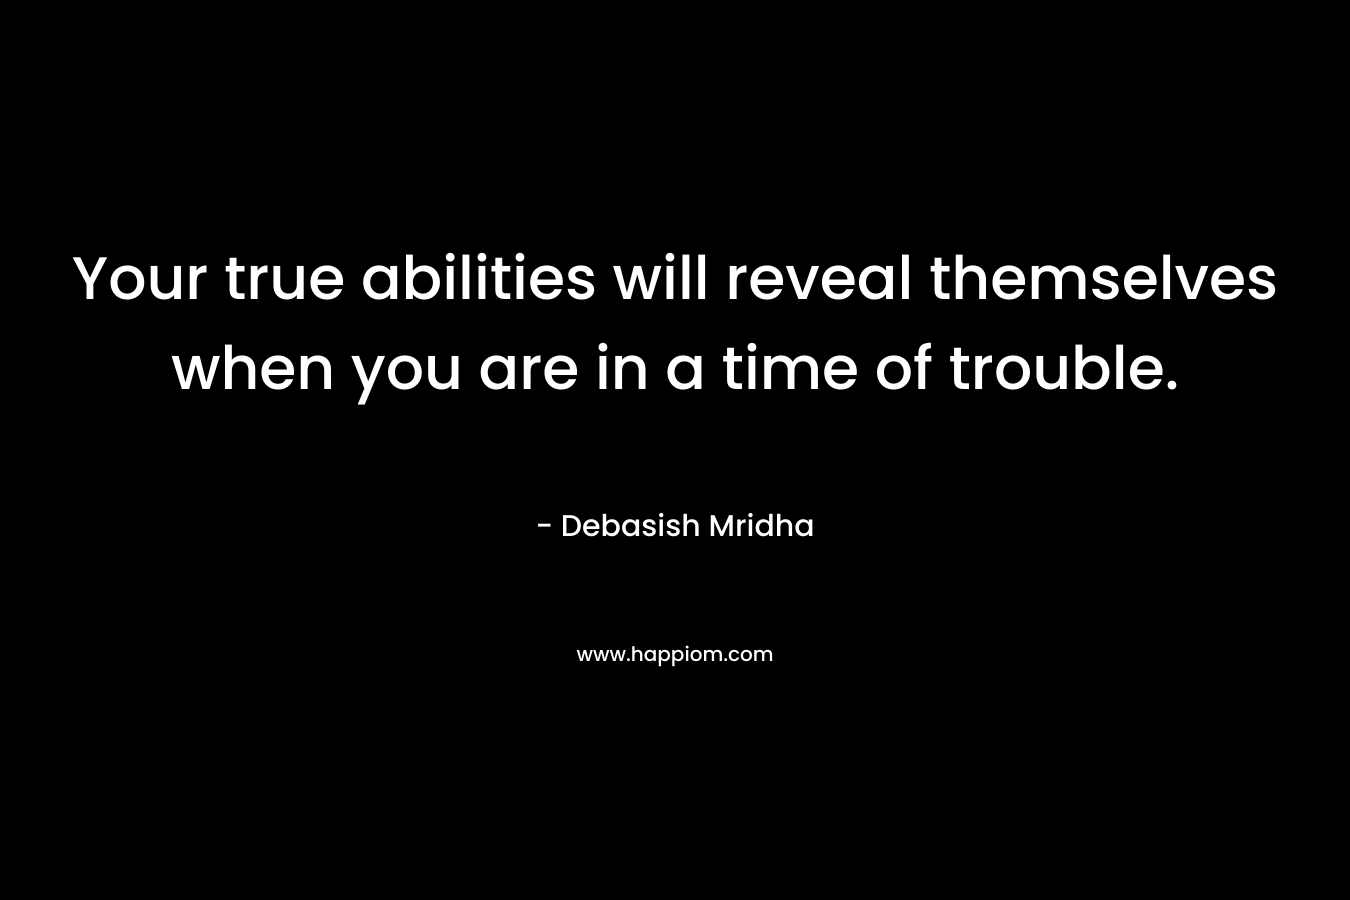 Your true abilities will reveal themselves when you are in a time of trouble.